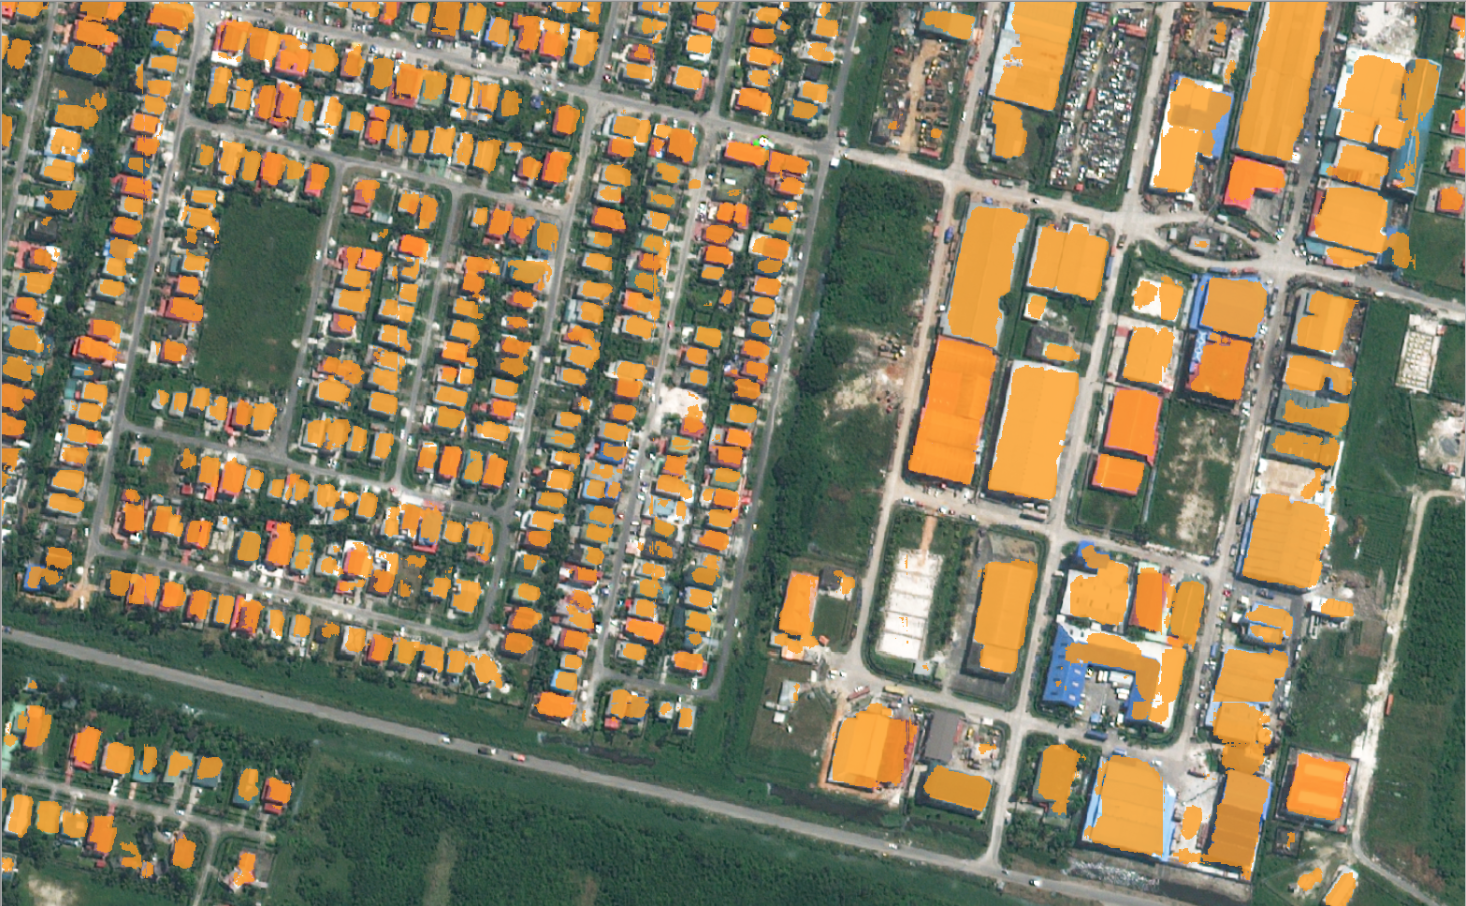 Predictions from a model trained on OSM data (buildings filled in orange) 